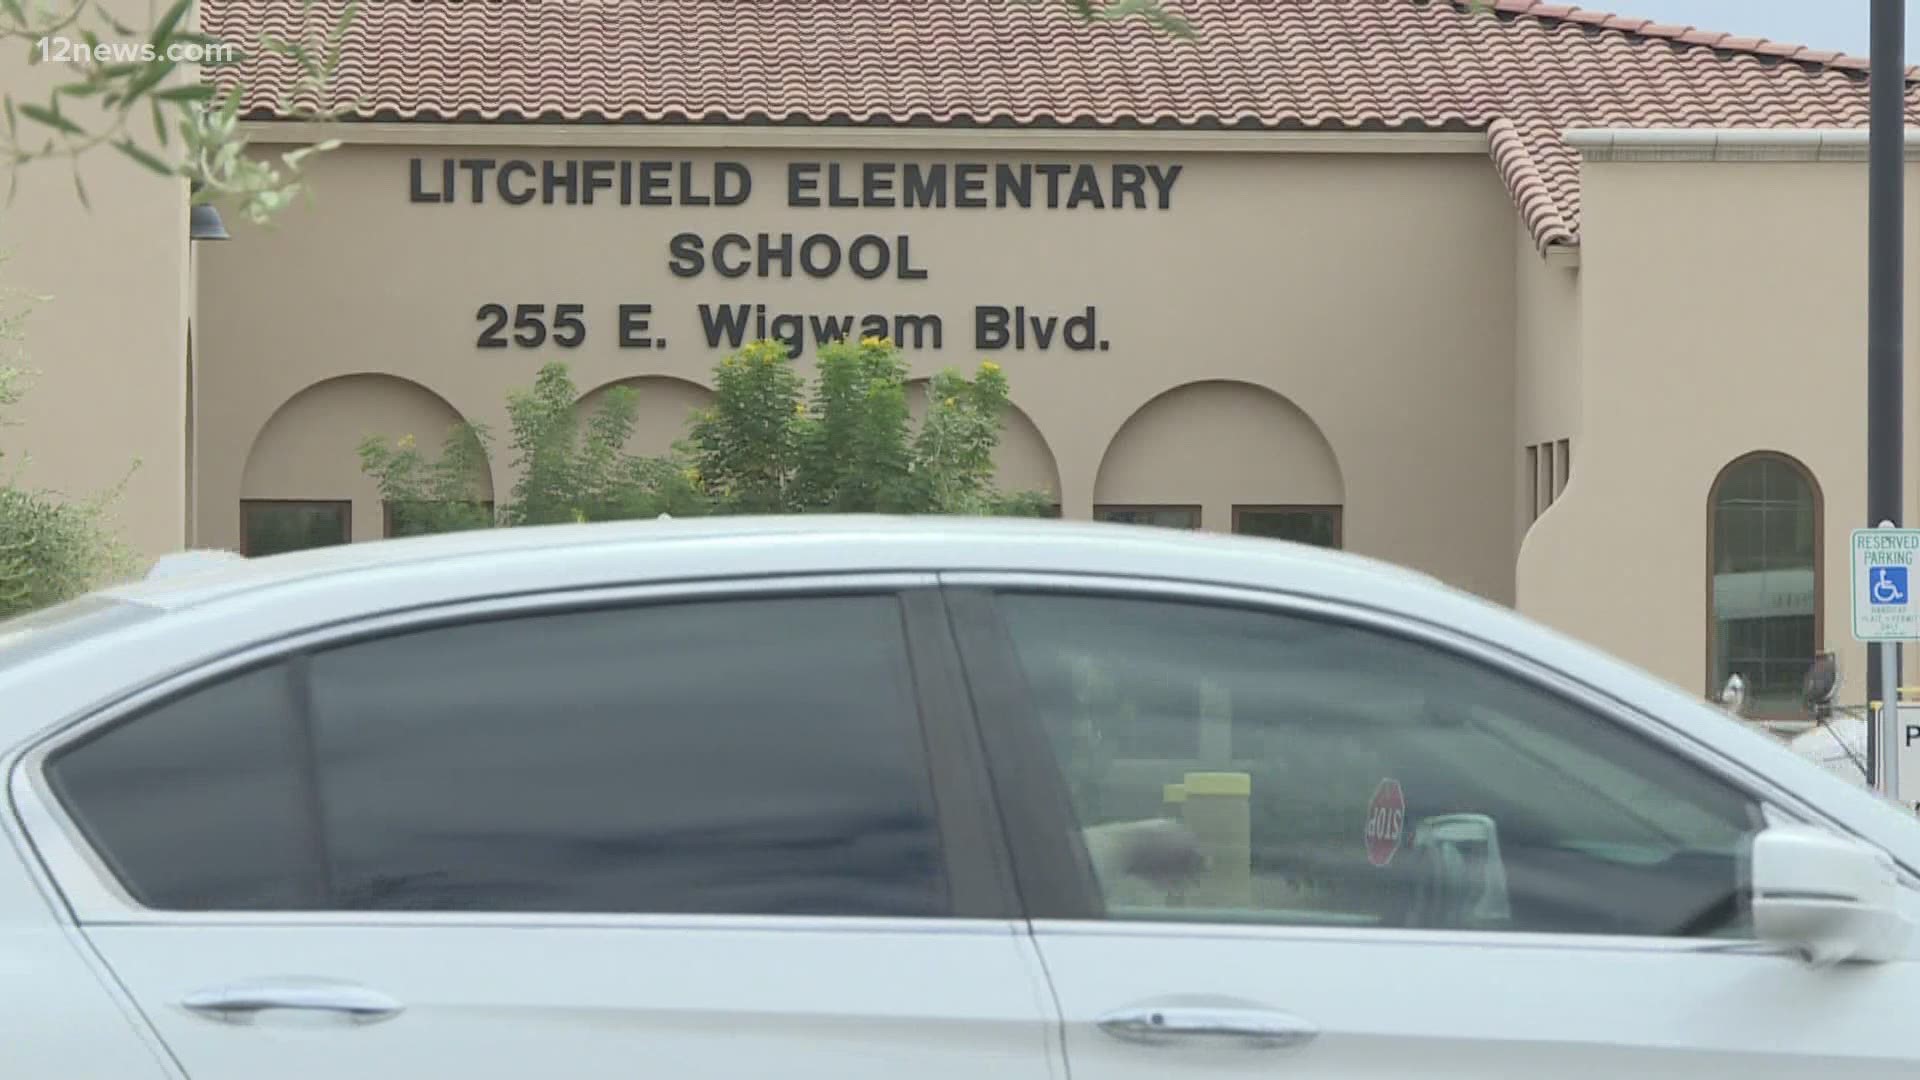 Students at Litchfield Elementary School District will return to remote learning full-time on Monday. Team 12's Matt Yurus has the latest.